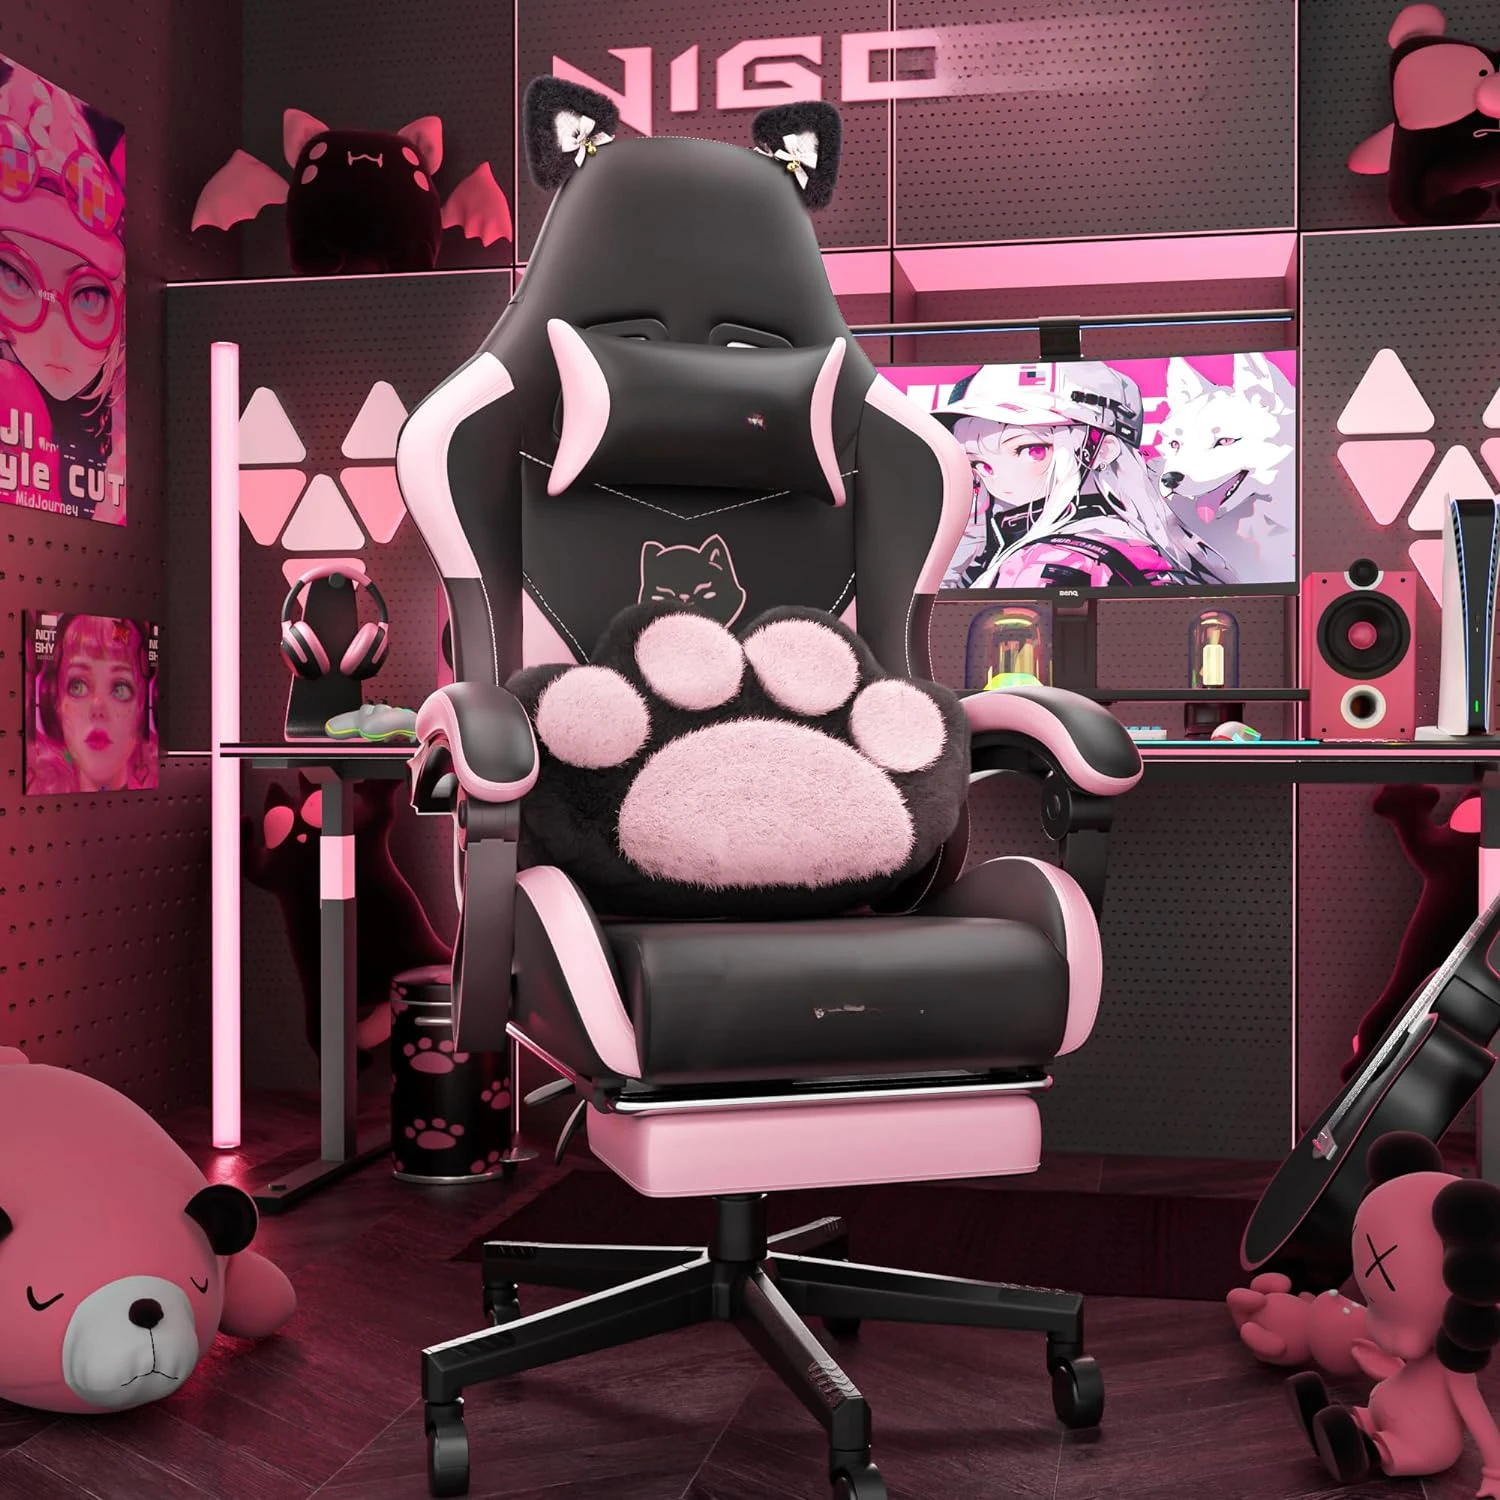 

Cute Reclining PC Gaming Chair with Cat Paw Lumbar Cushion and Cat Ears, Ergonomic Computer Chair with Footrest, Black Pink